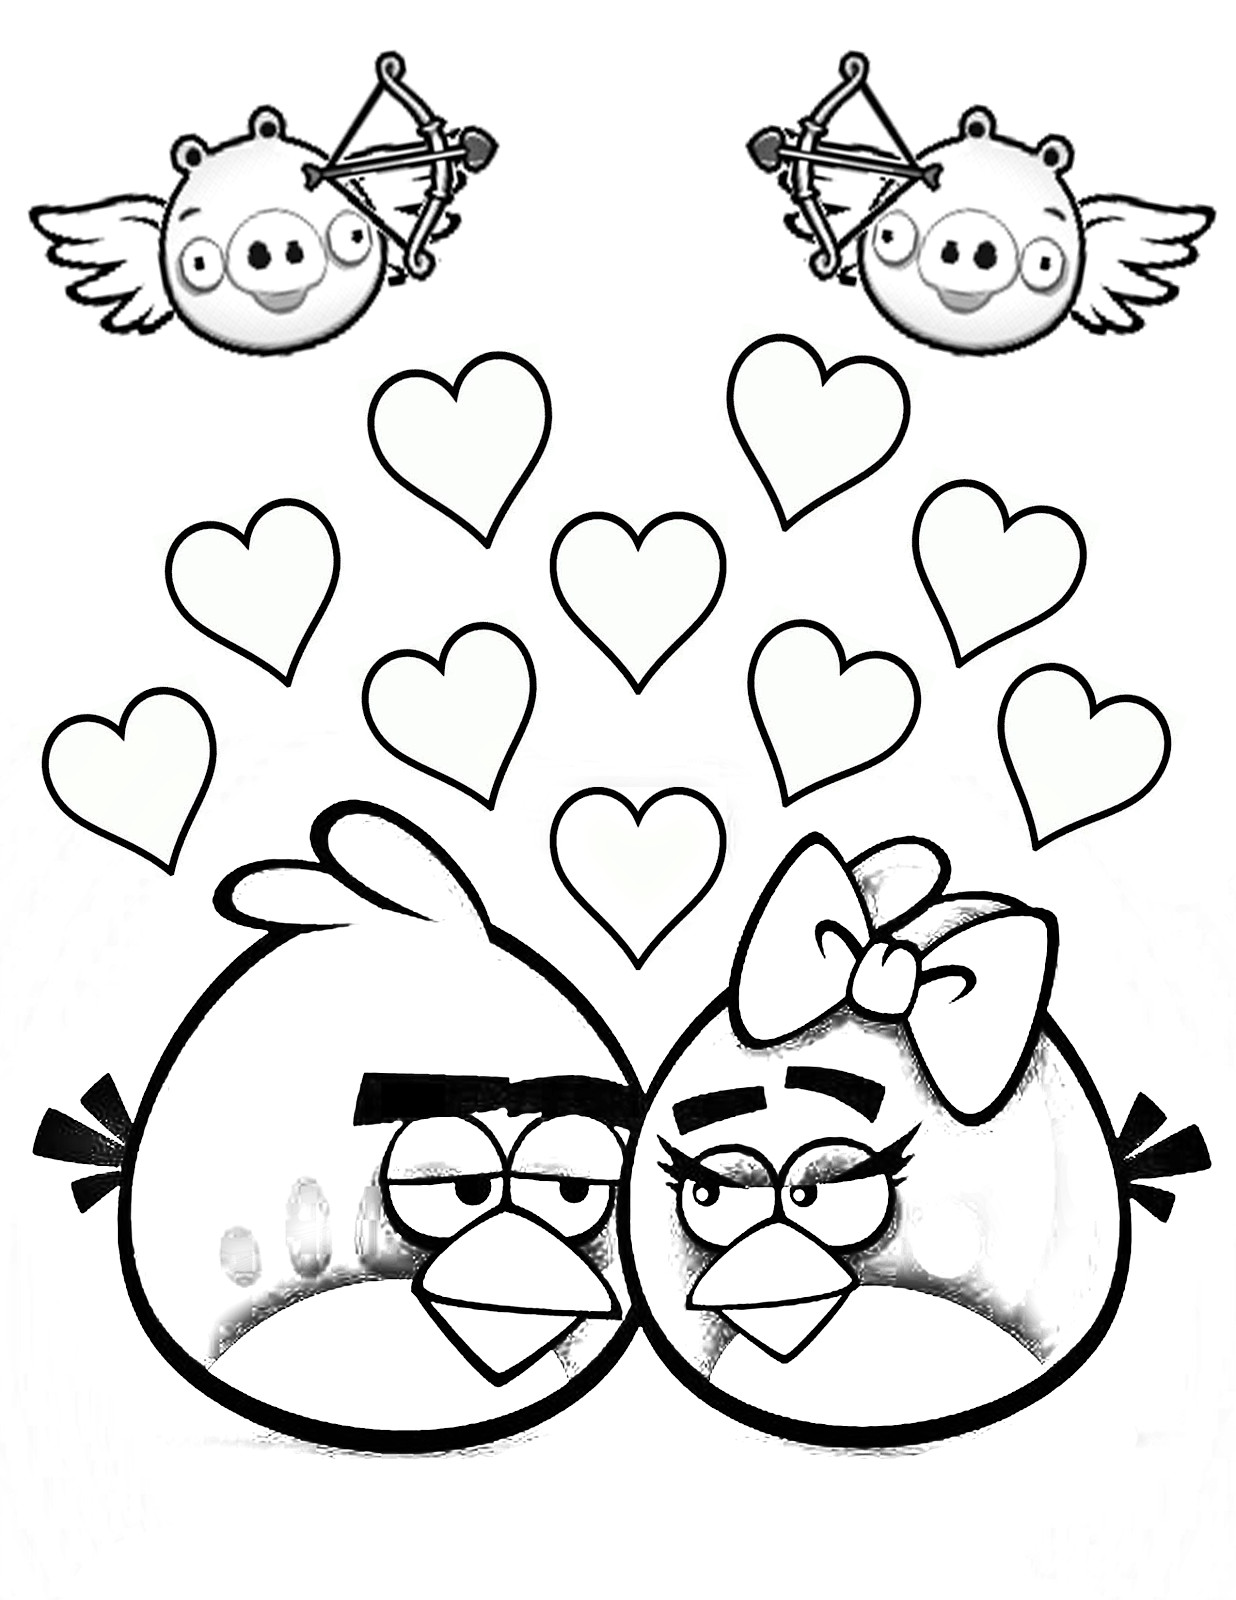 Angry Bird Printable Coloring Pages
 Angry Bird Coloring Pages Printable Coloring Pages Free